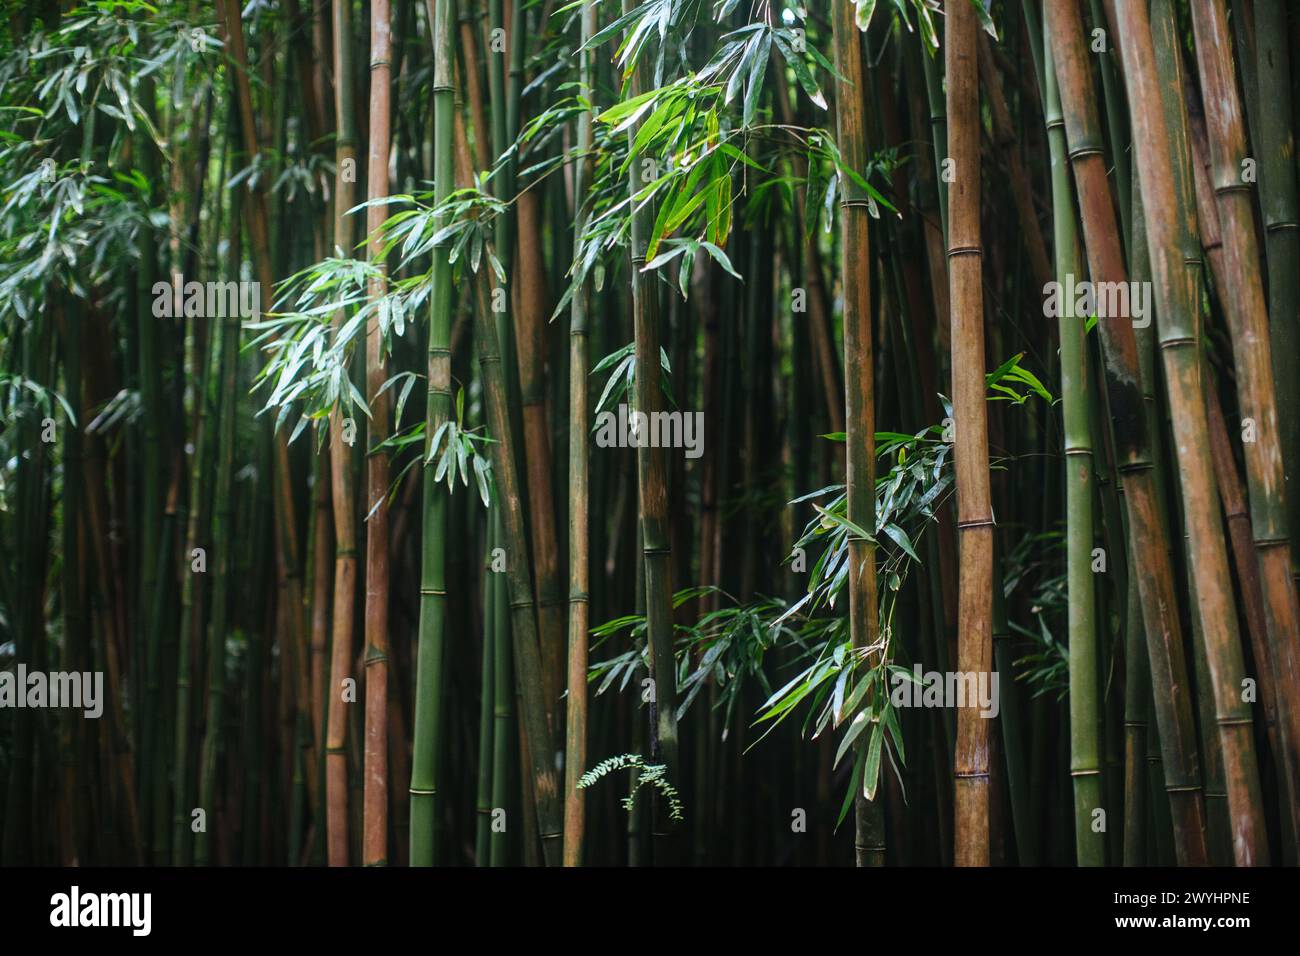 Bamboo forest and foliage on the road to Hana on the tropical island of Maui Hawaii Stock Photo